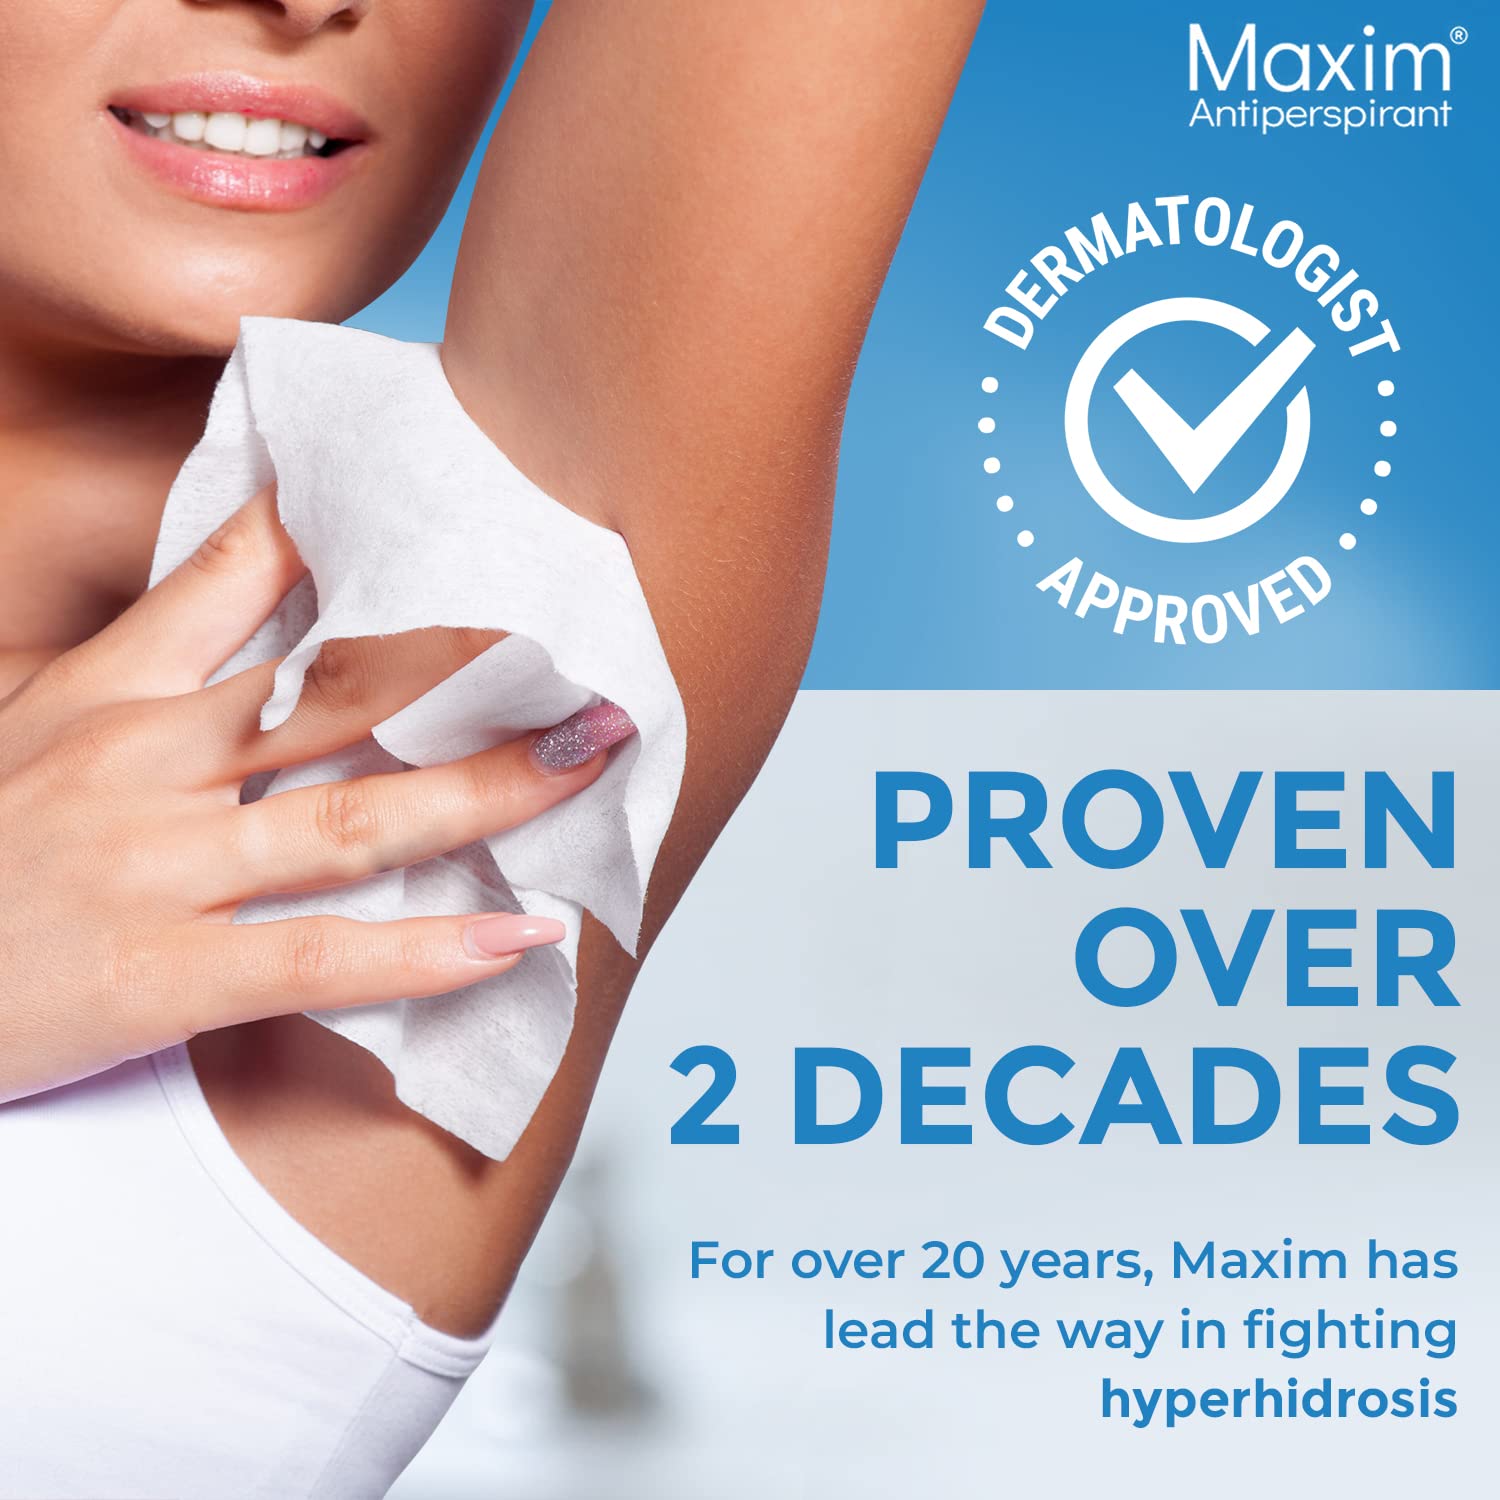 Maxim Antiperspirant Deodorant Towelette - Deodorant Wipes Individually Wrapped, Contains Active Aluminum Chloride, Excessive Sweating And Hyperhidrosis Treatment (4-Pack, 10 Wipes Per Pack) : Beauty & Personal Care